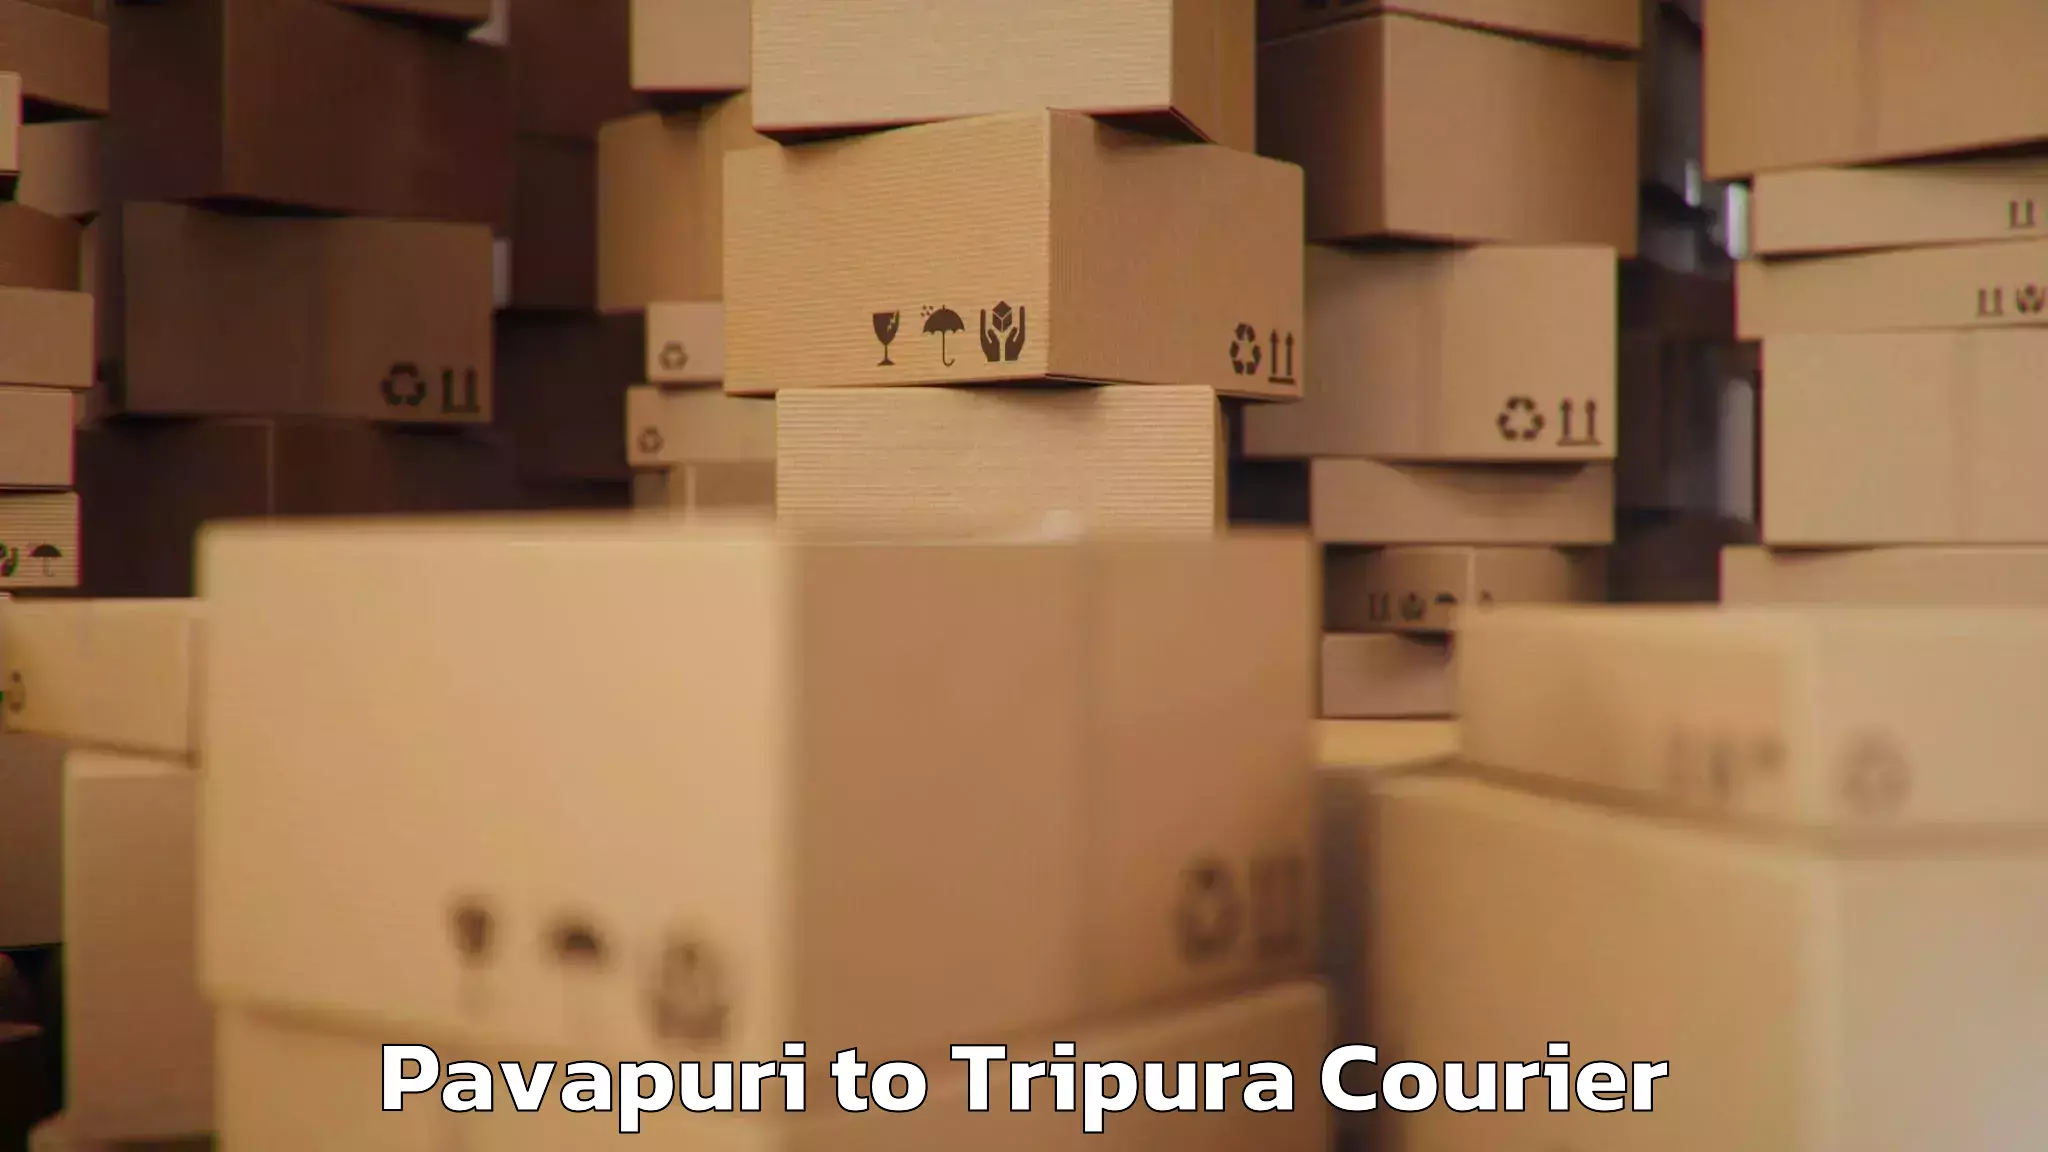 Heavy luggage shipping in Pavapuri to Udaipur Tripura